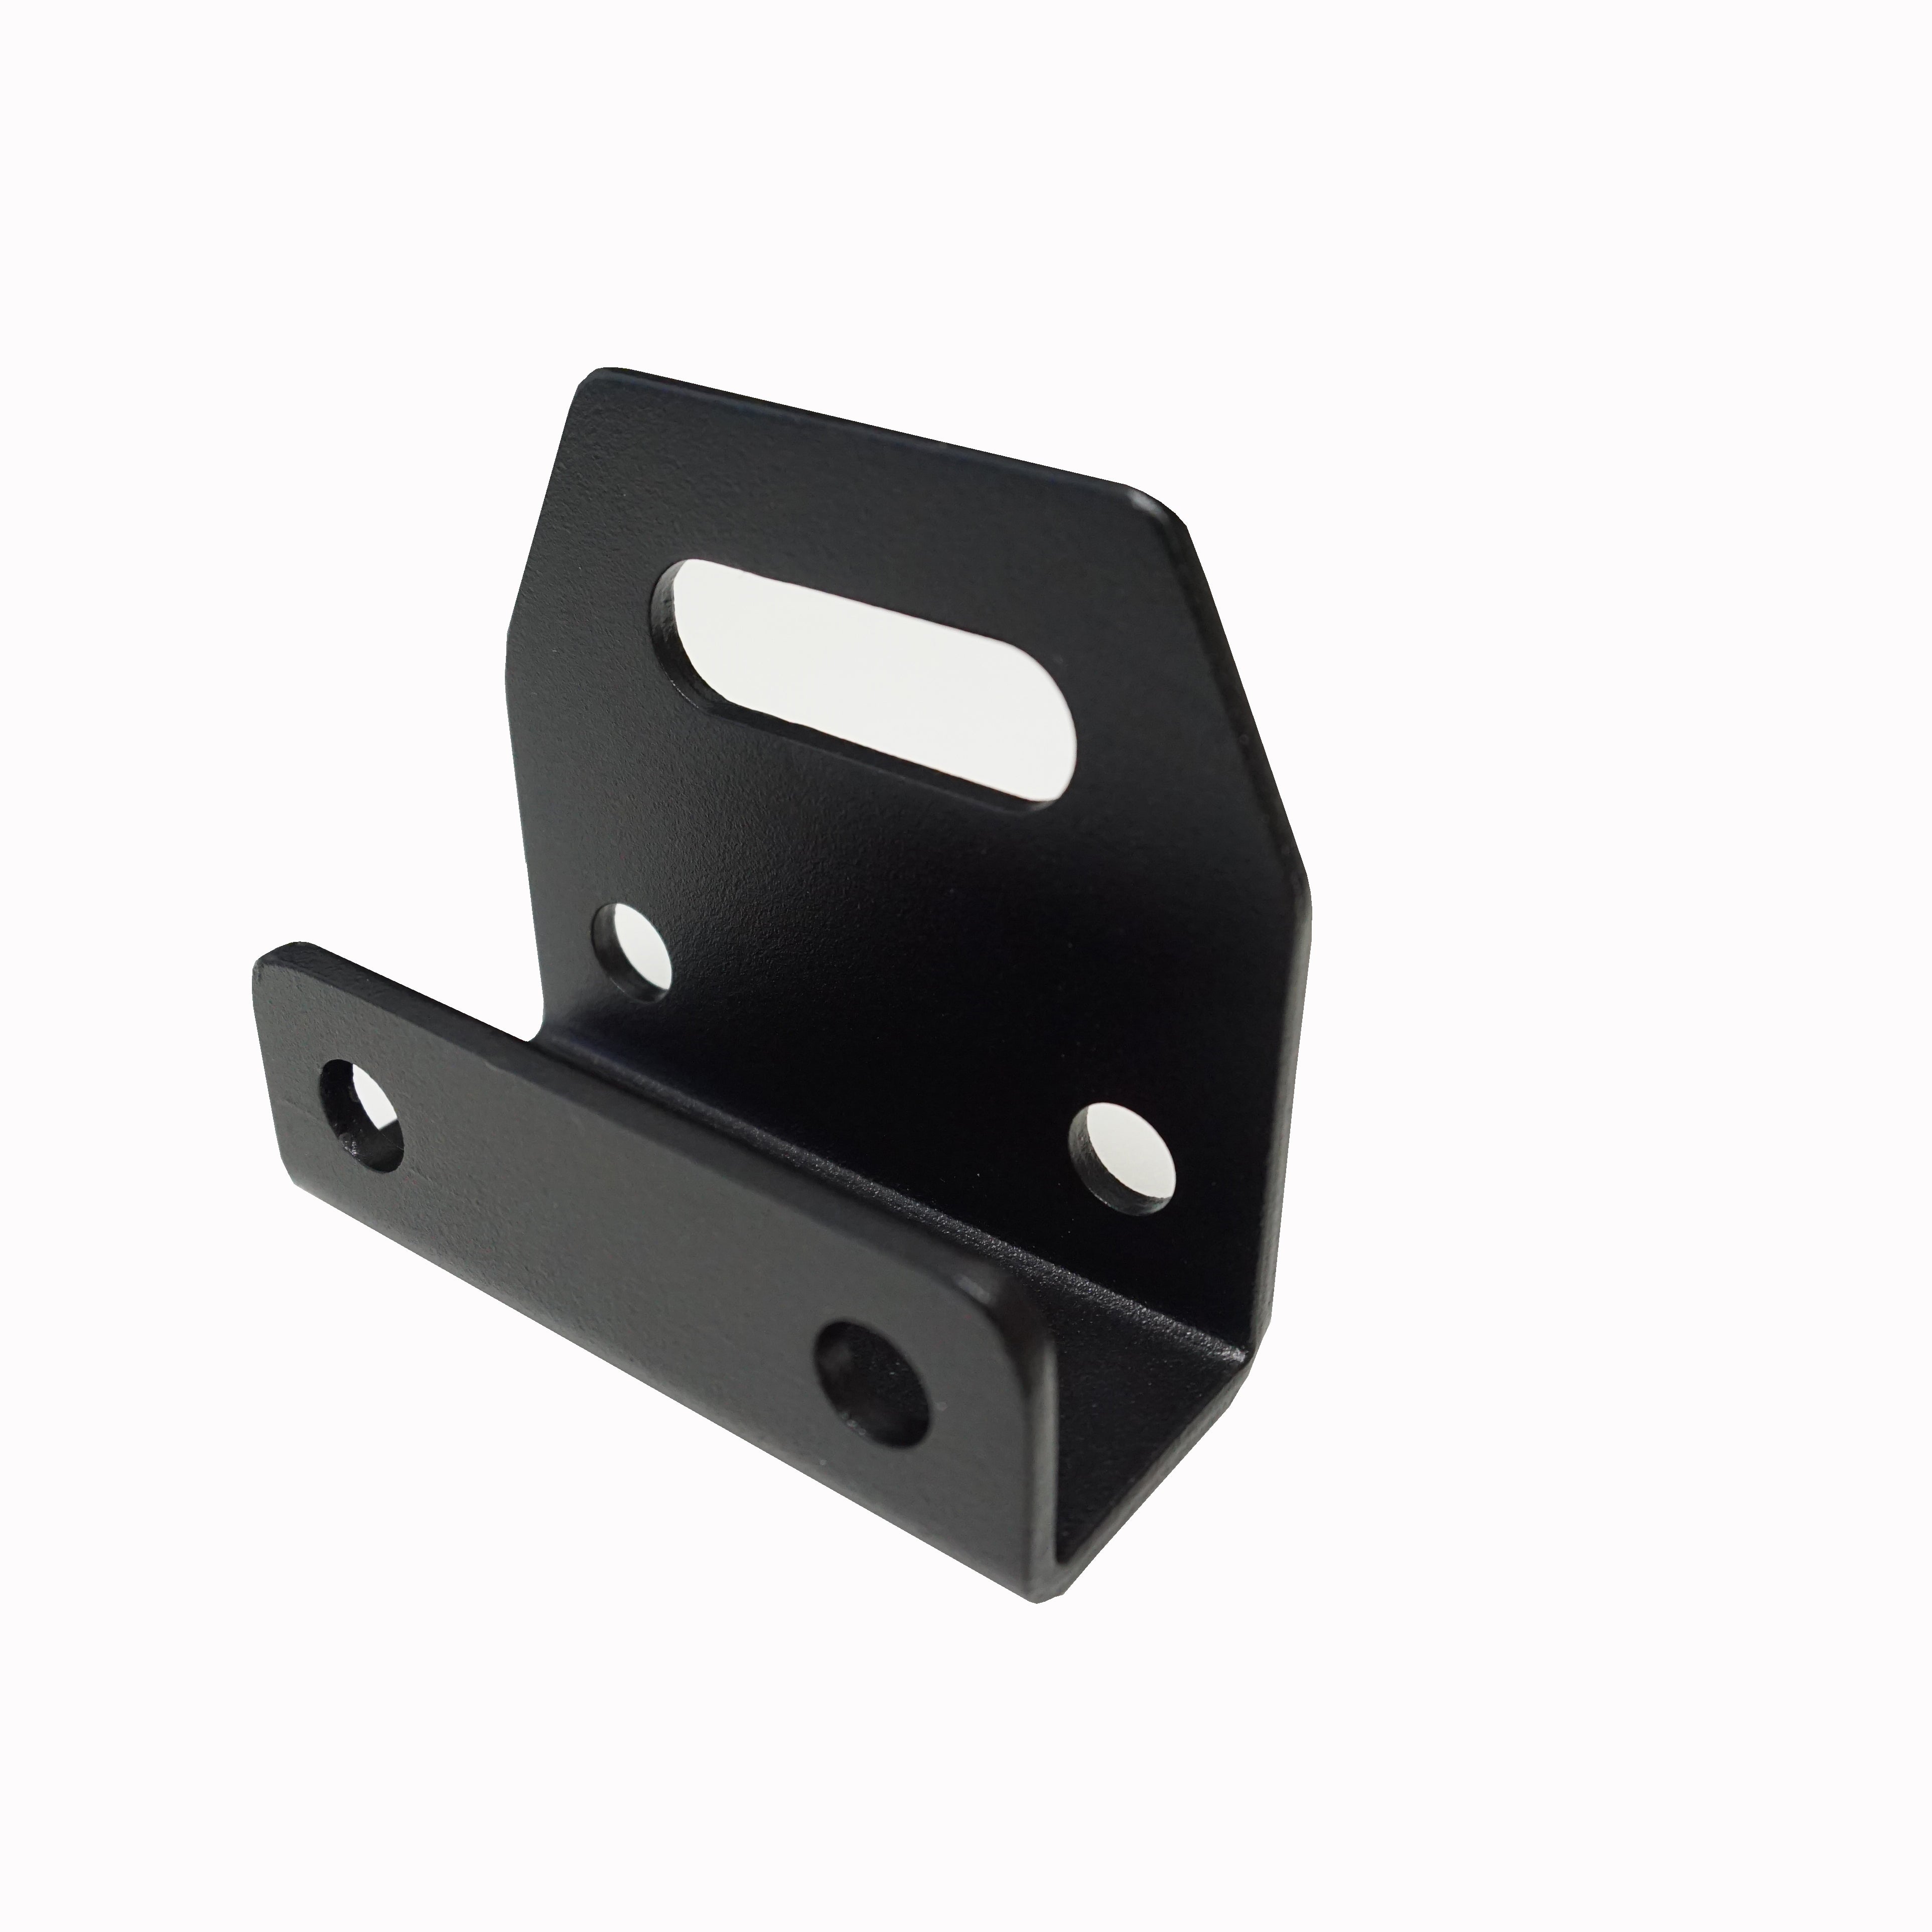 The Wall Mount Bracket Kit, Accessories